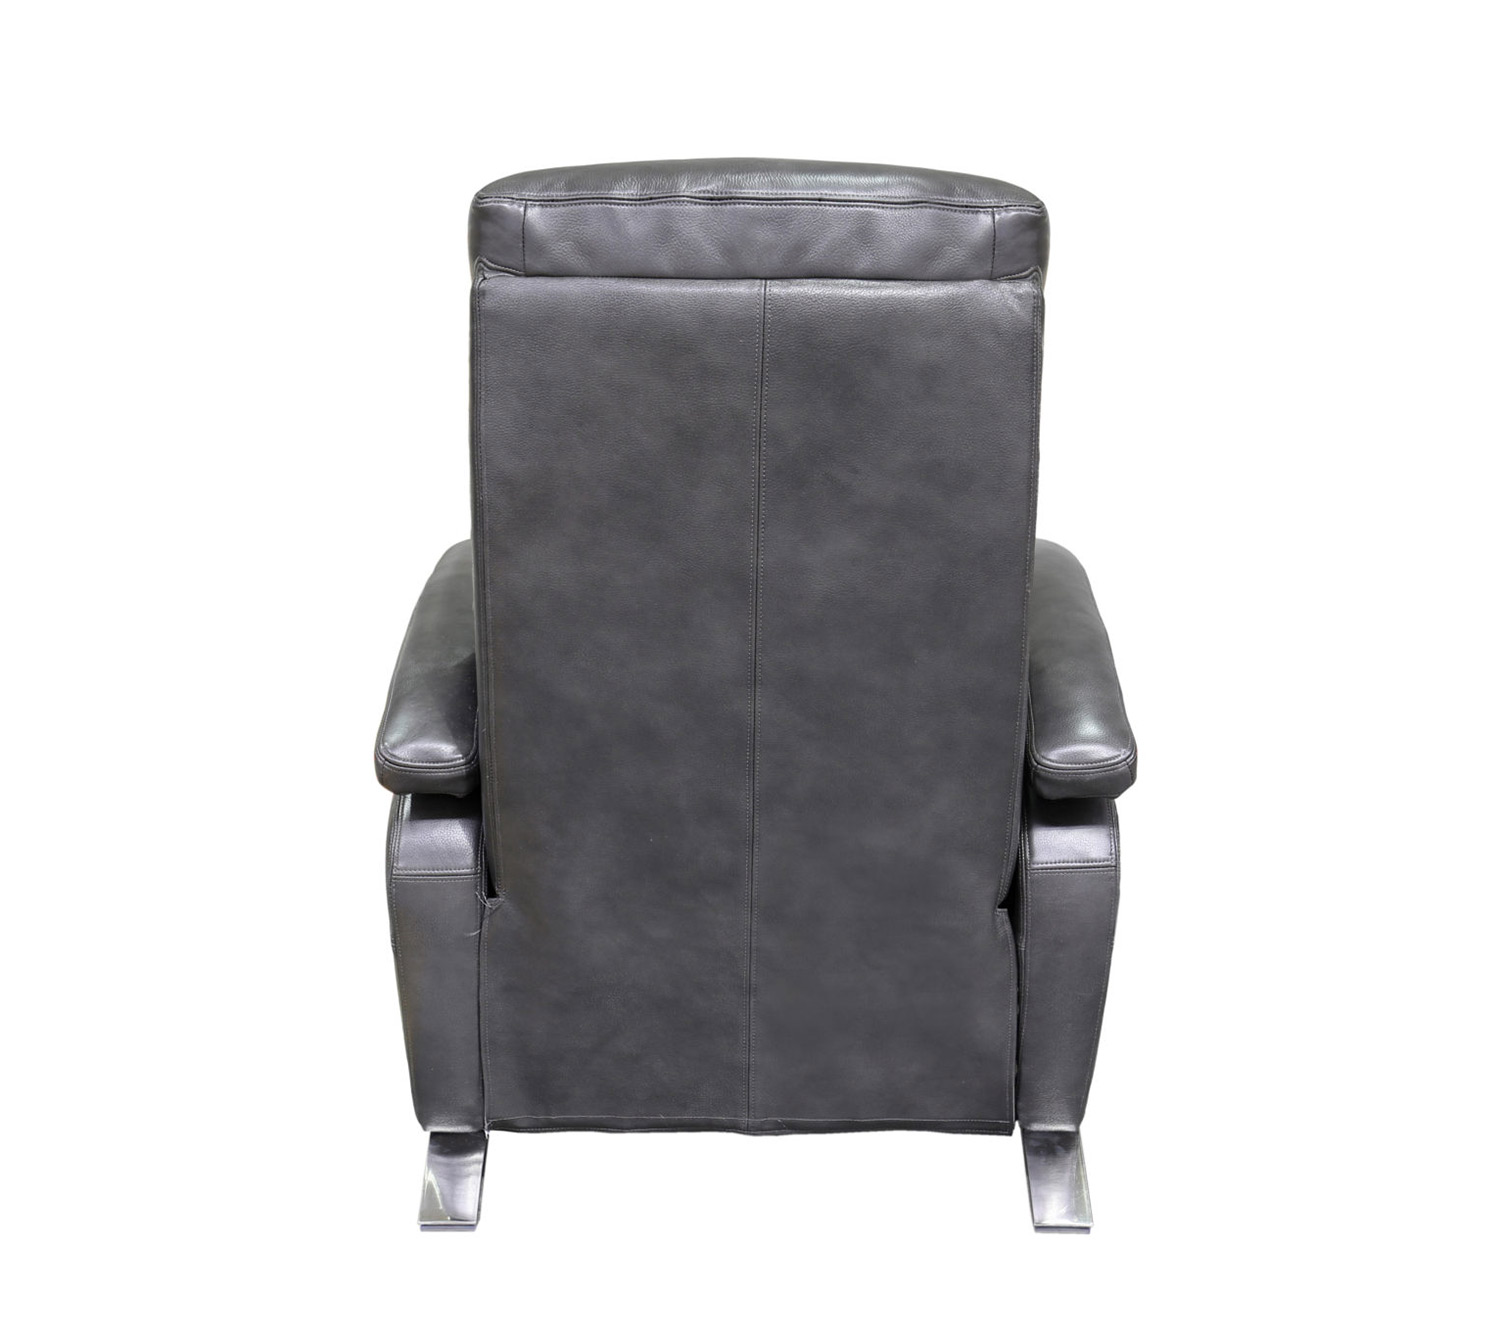 Barcalounger Giovanni Recliner Chair - Wrenn Gray/all leather